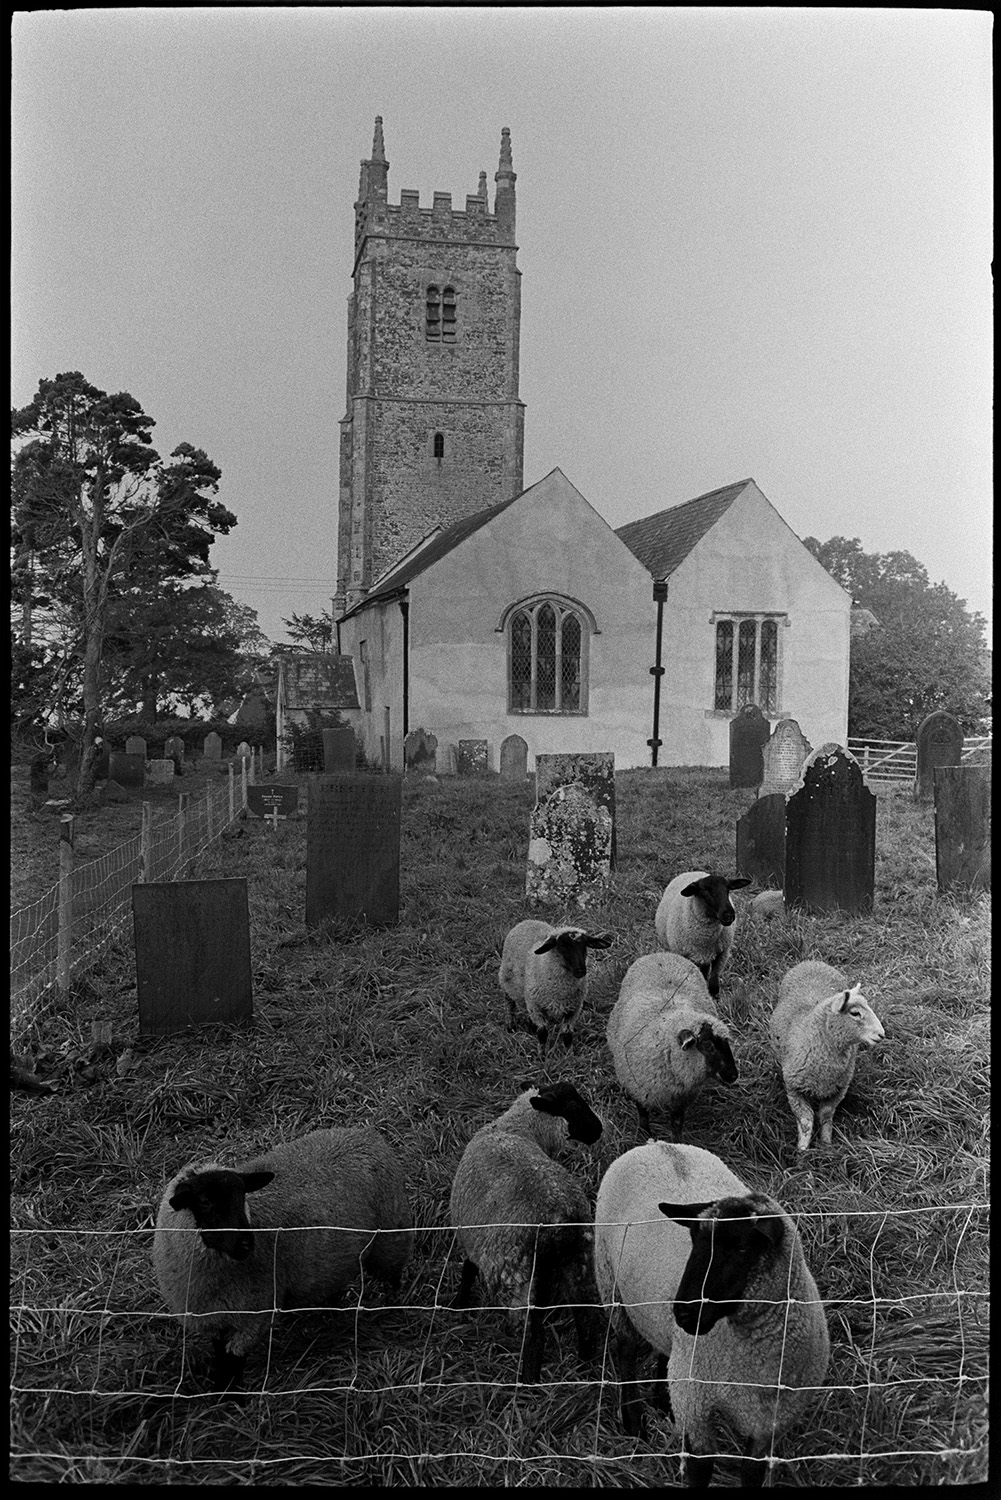 Sheep in graveyard, church with tower.
[Sheep grazing amongst the gravestones at Dowland churchyard. The church is visible in the background. The churchyard is enclosed by a wire fence.]